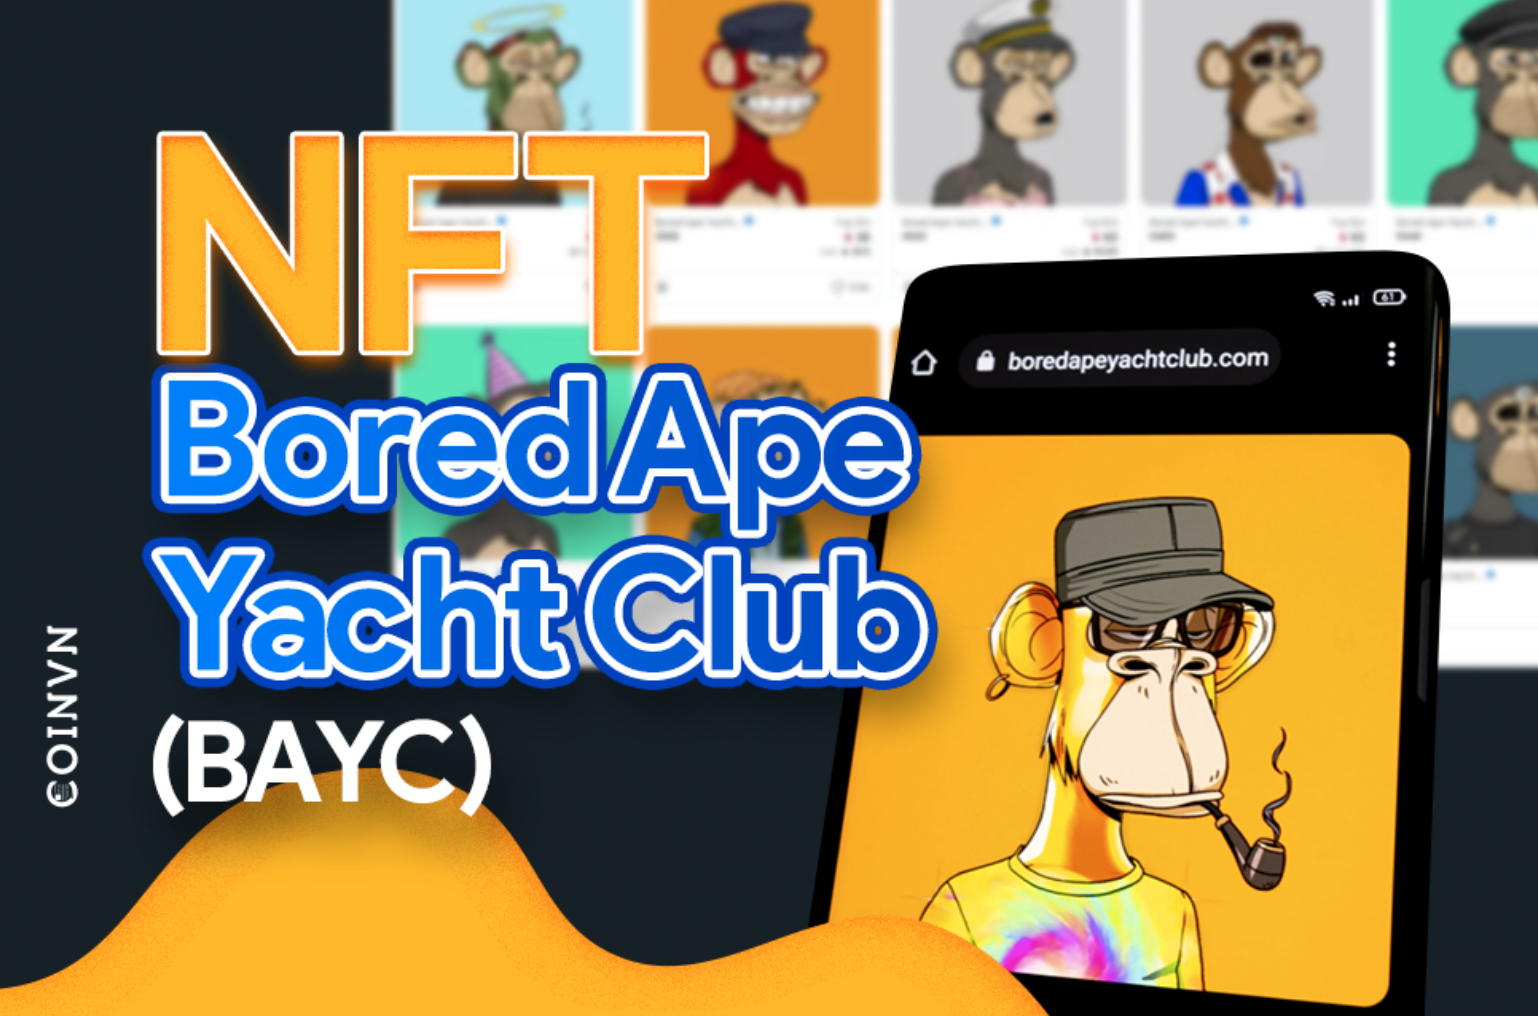 What you Need to Know About the NFT Bored Ape Yacht Club (BAYC) collection